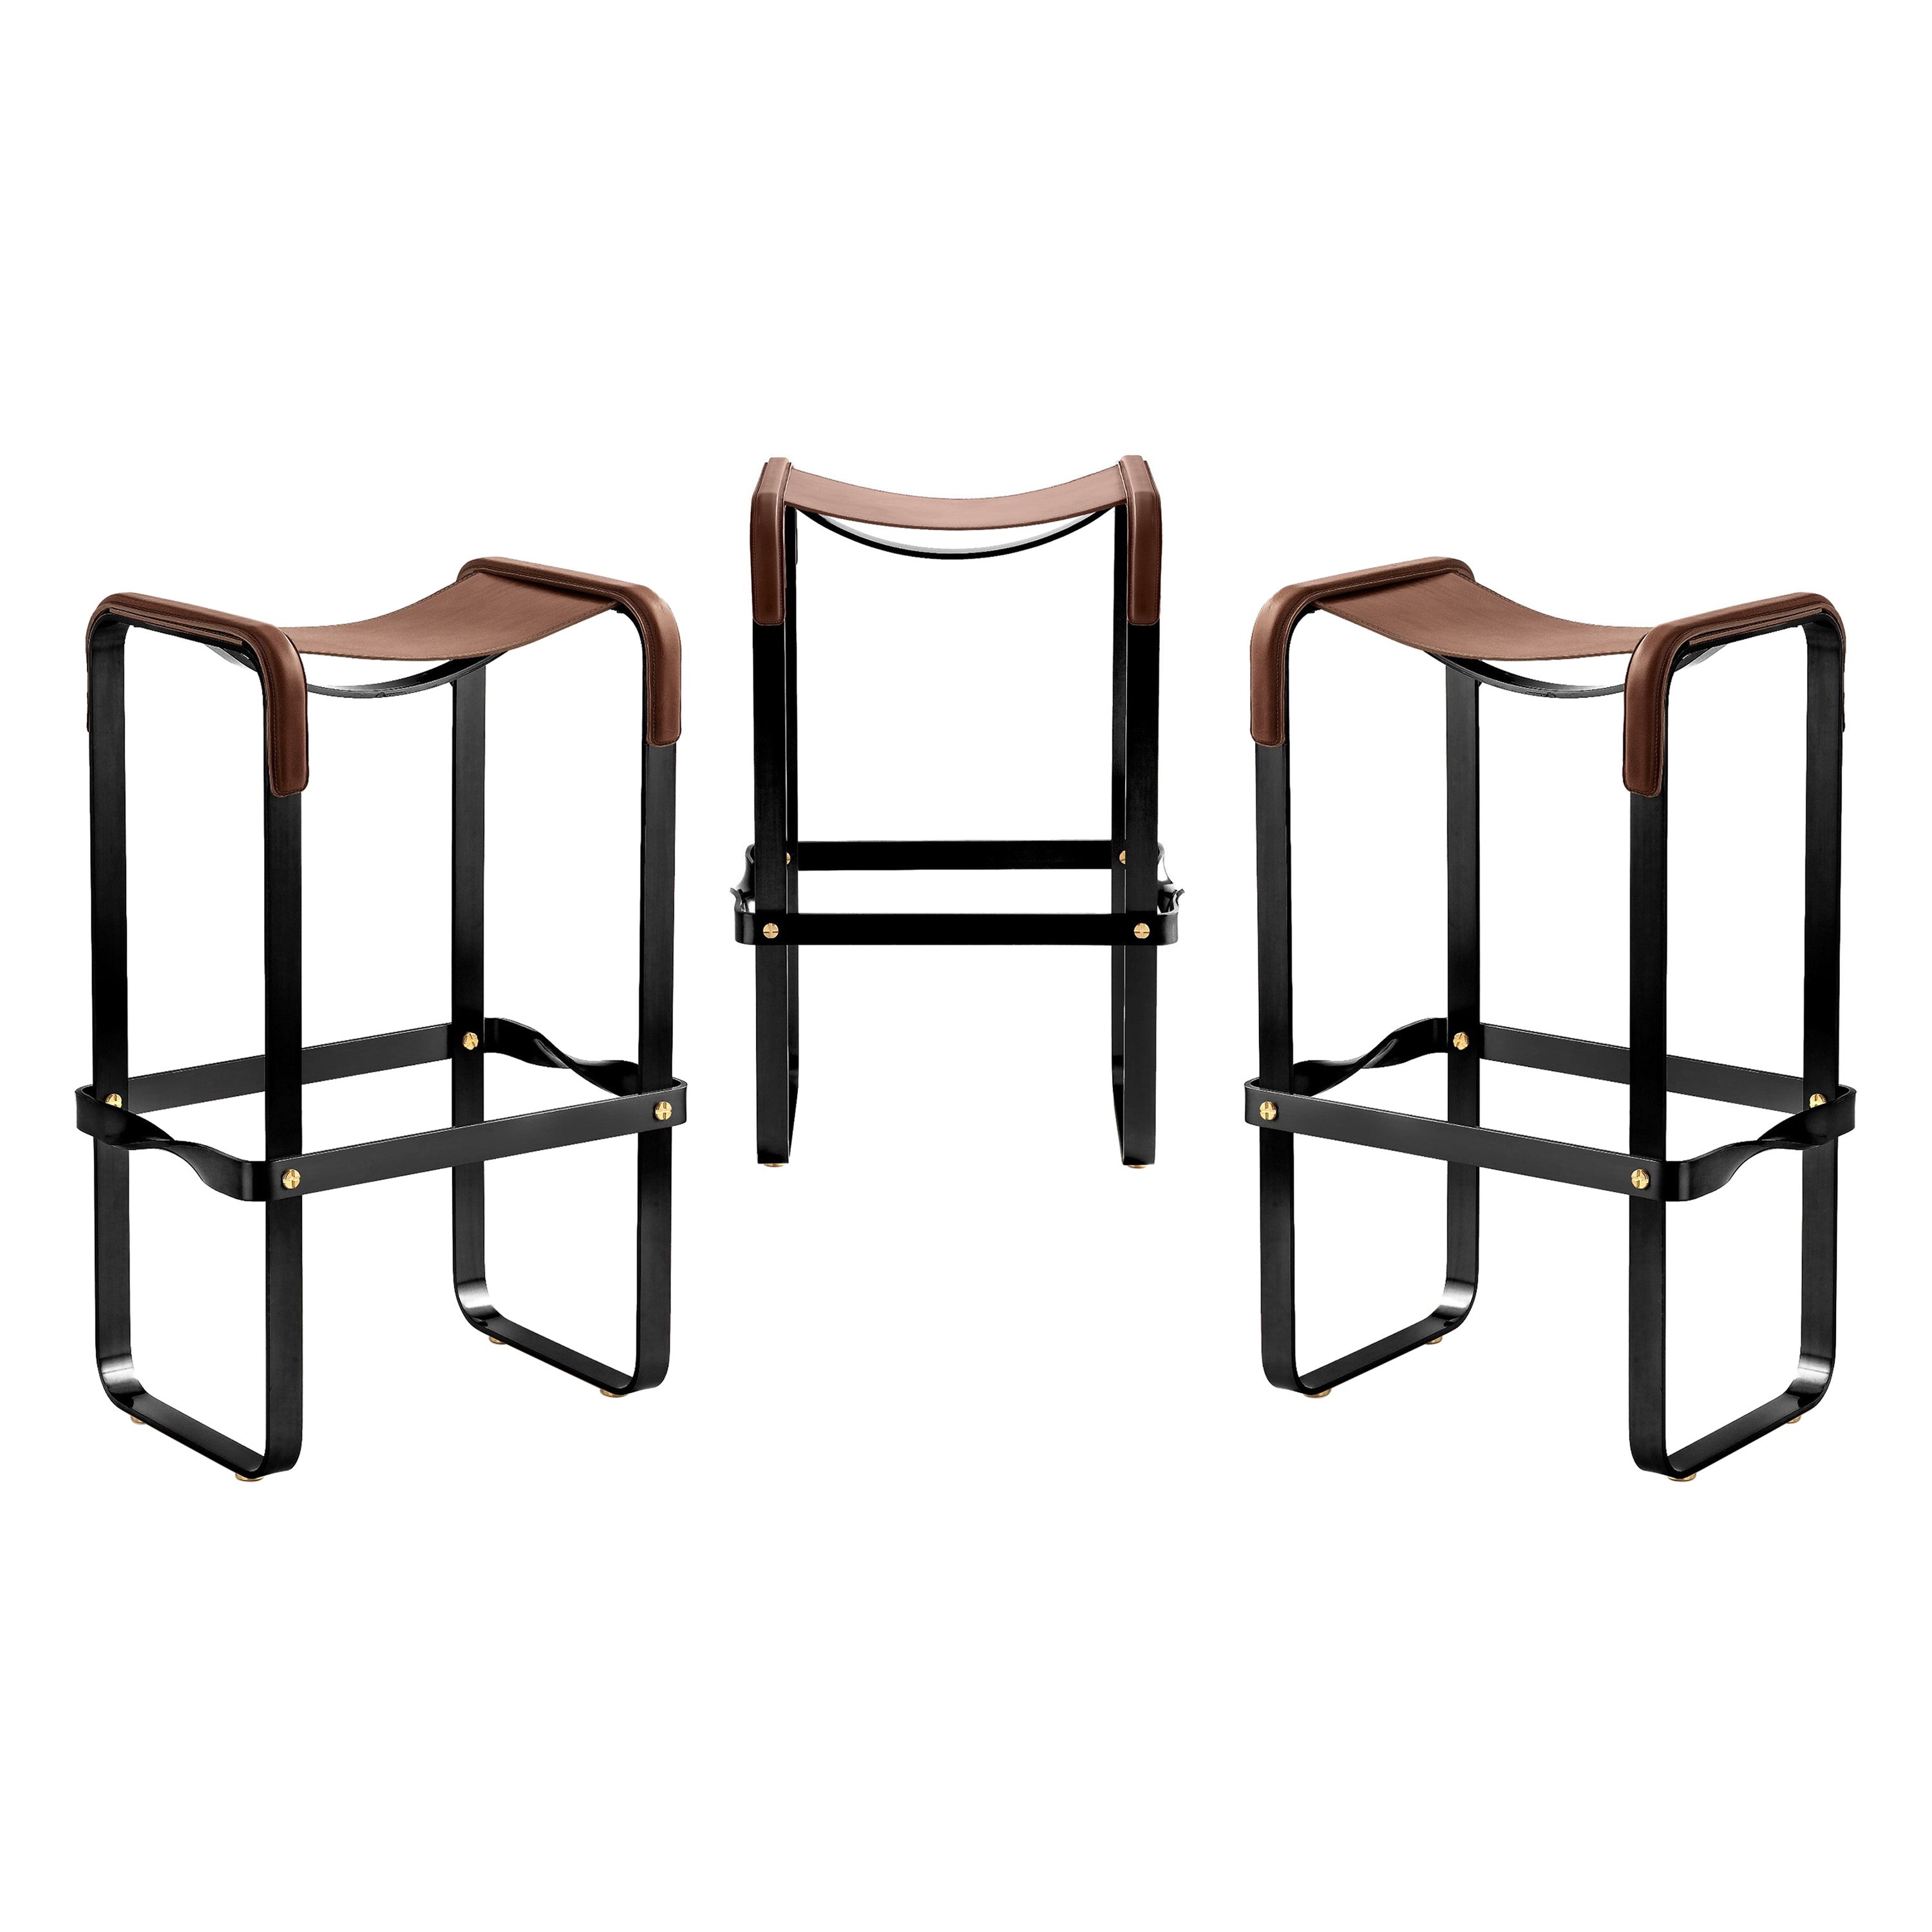 Set of 3 Classic Contemporary Bar Stool Black Smoke Steel & Dark Brown Leather For Sale